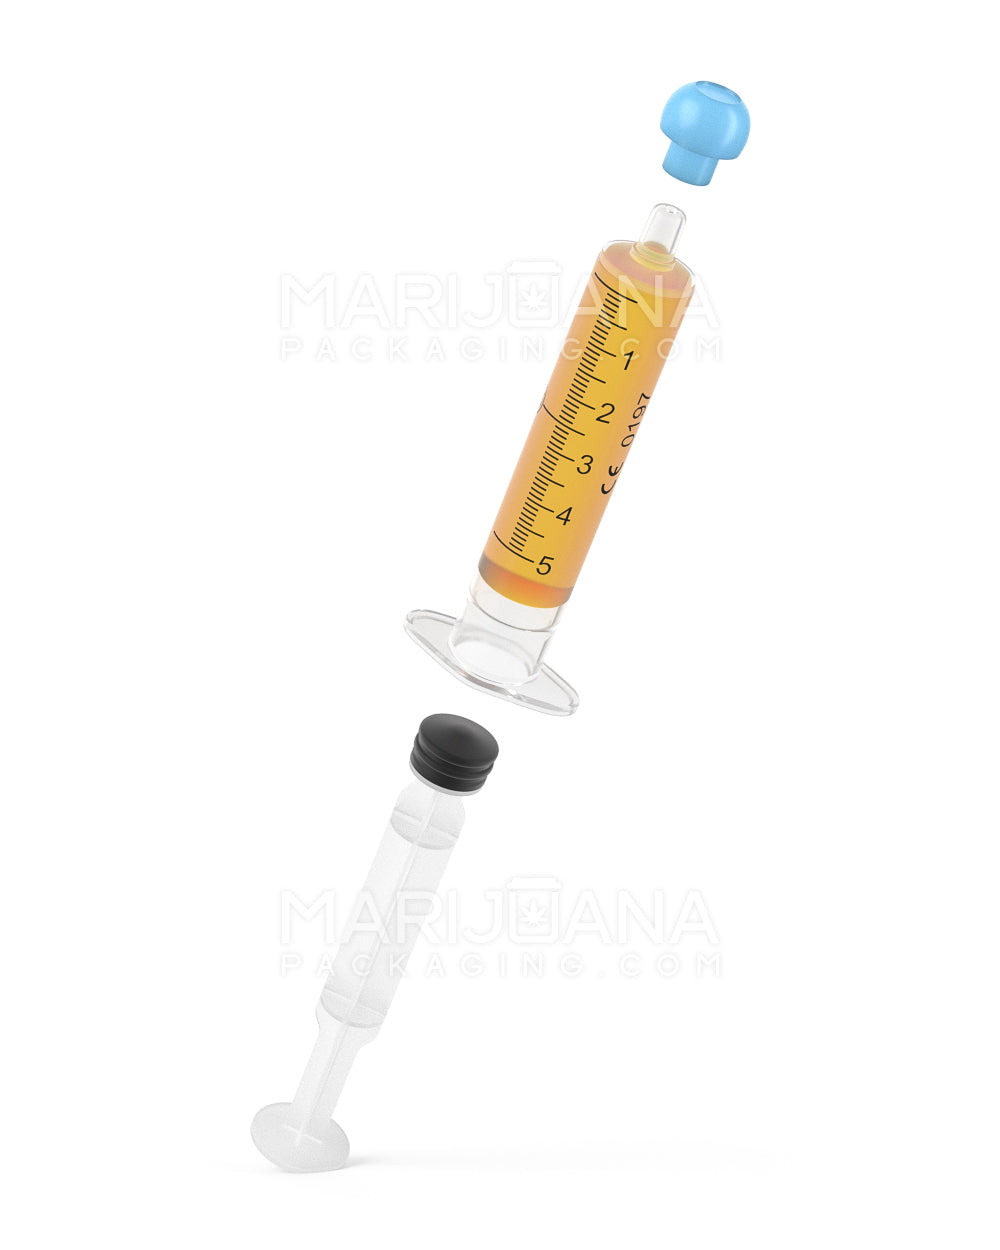 Plastic Oral Concentrate Syringes | 5mL - 1mL Increments | Sample - 7